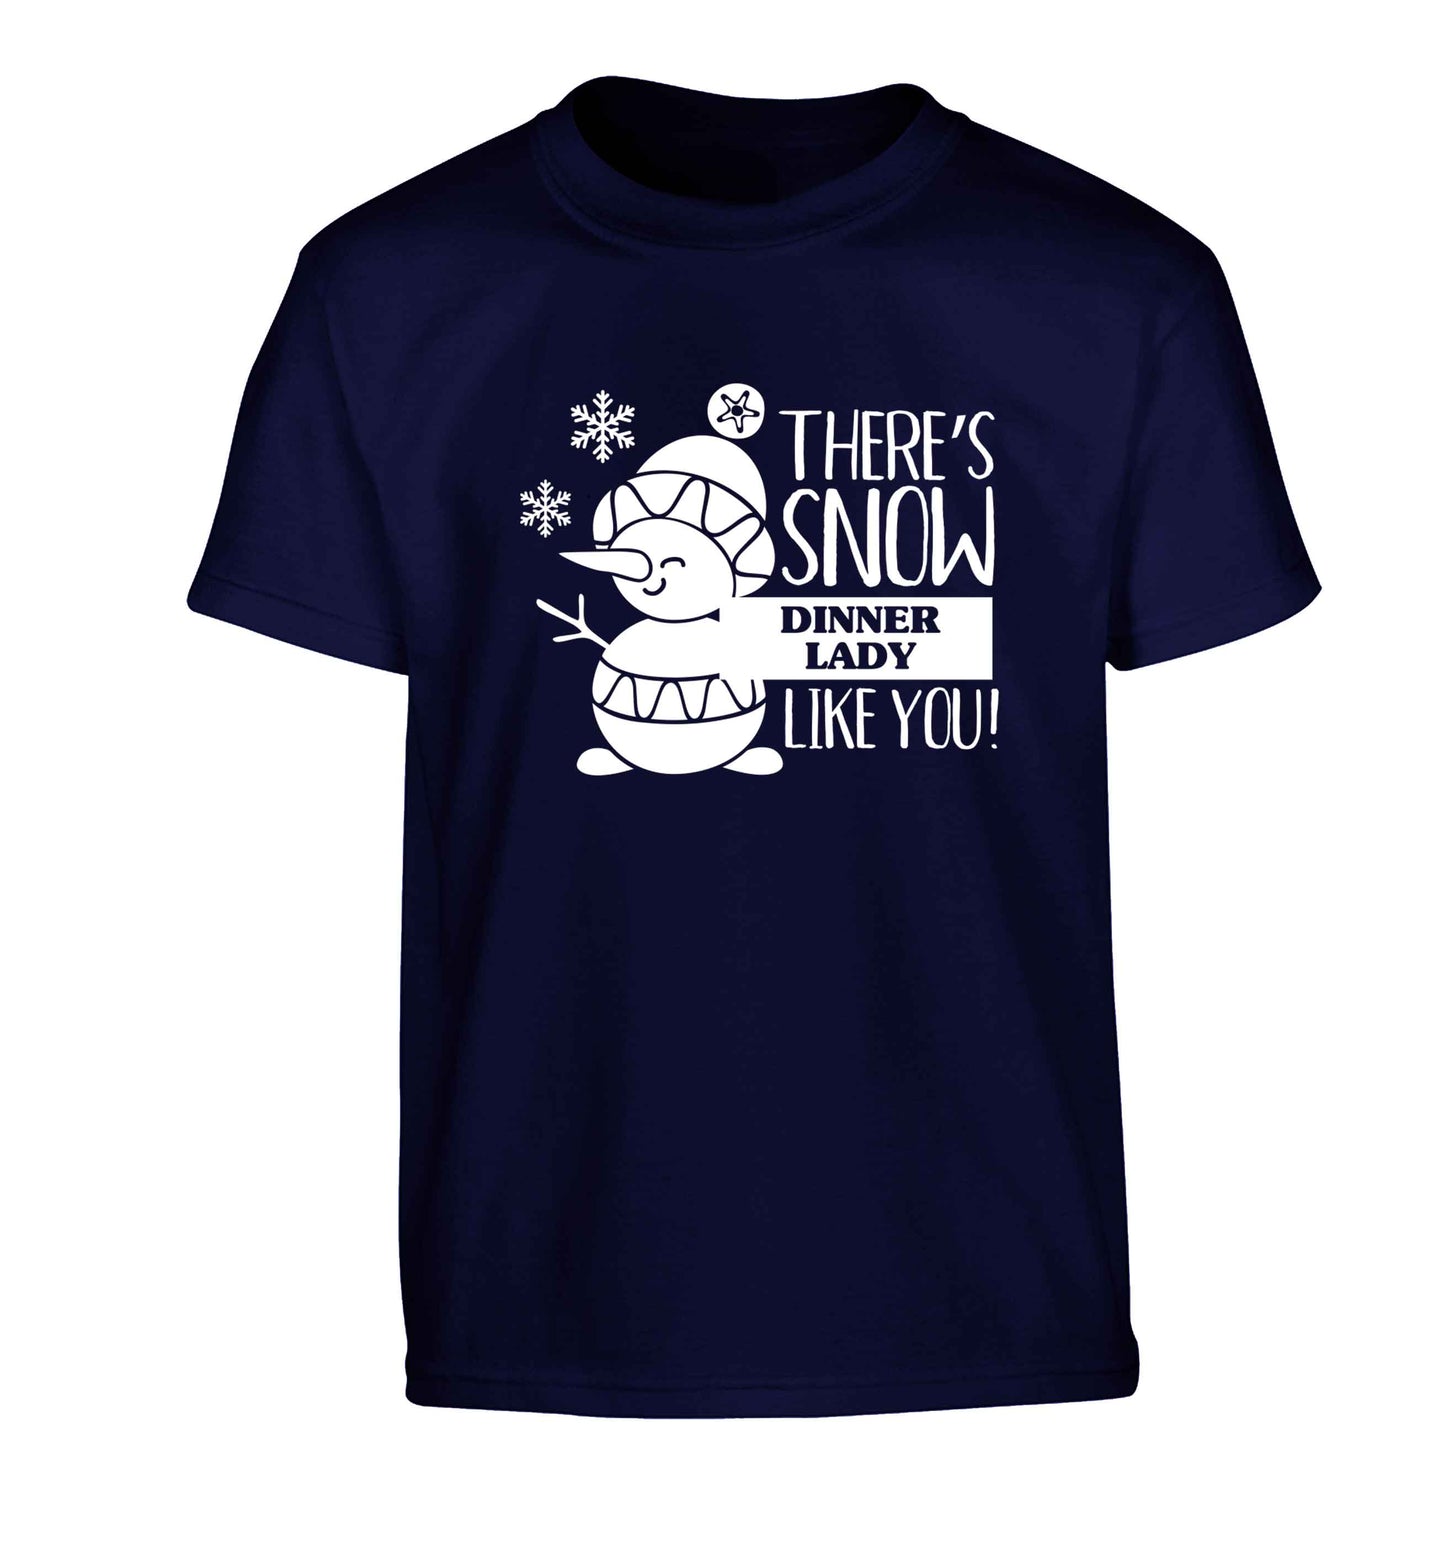 There's snow dinner lady like you Children's navy Tshirt 12-13 Years